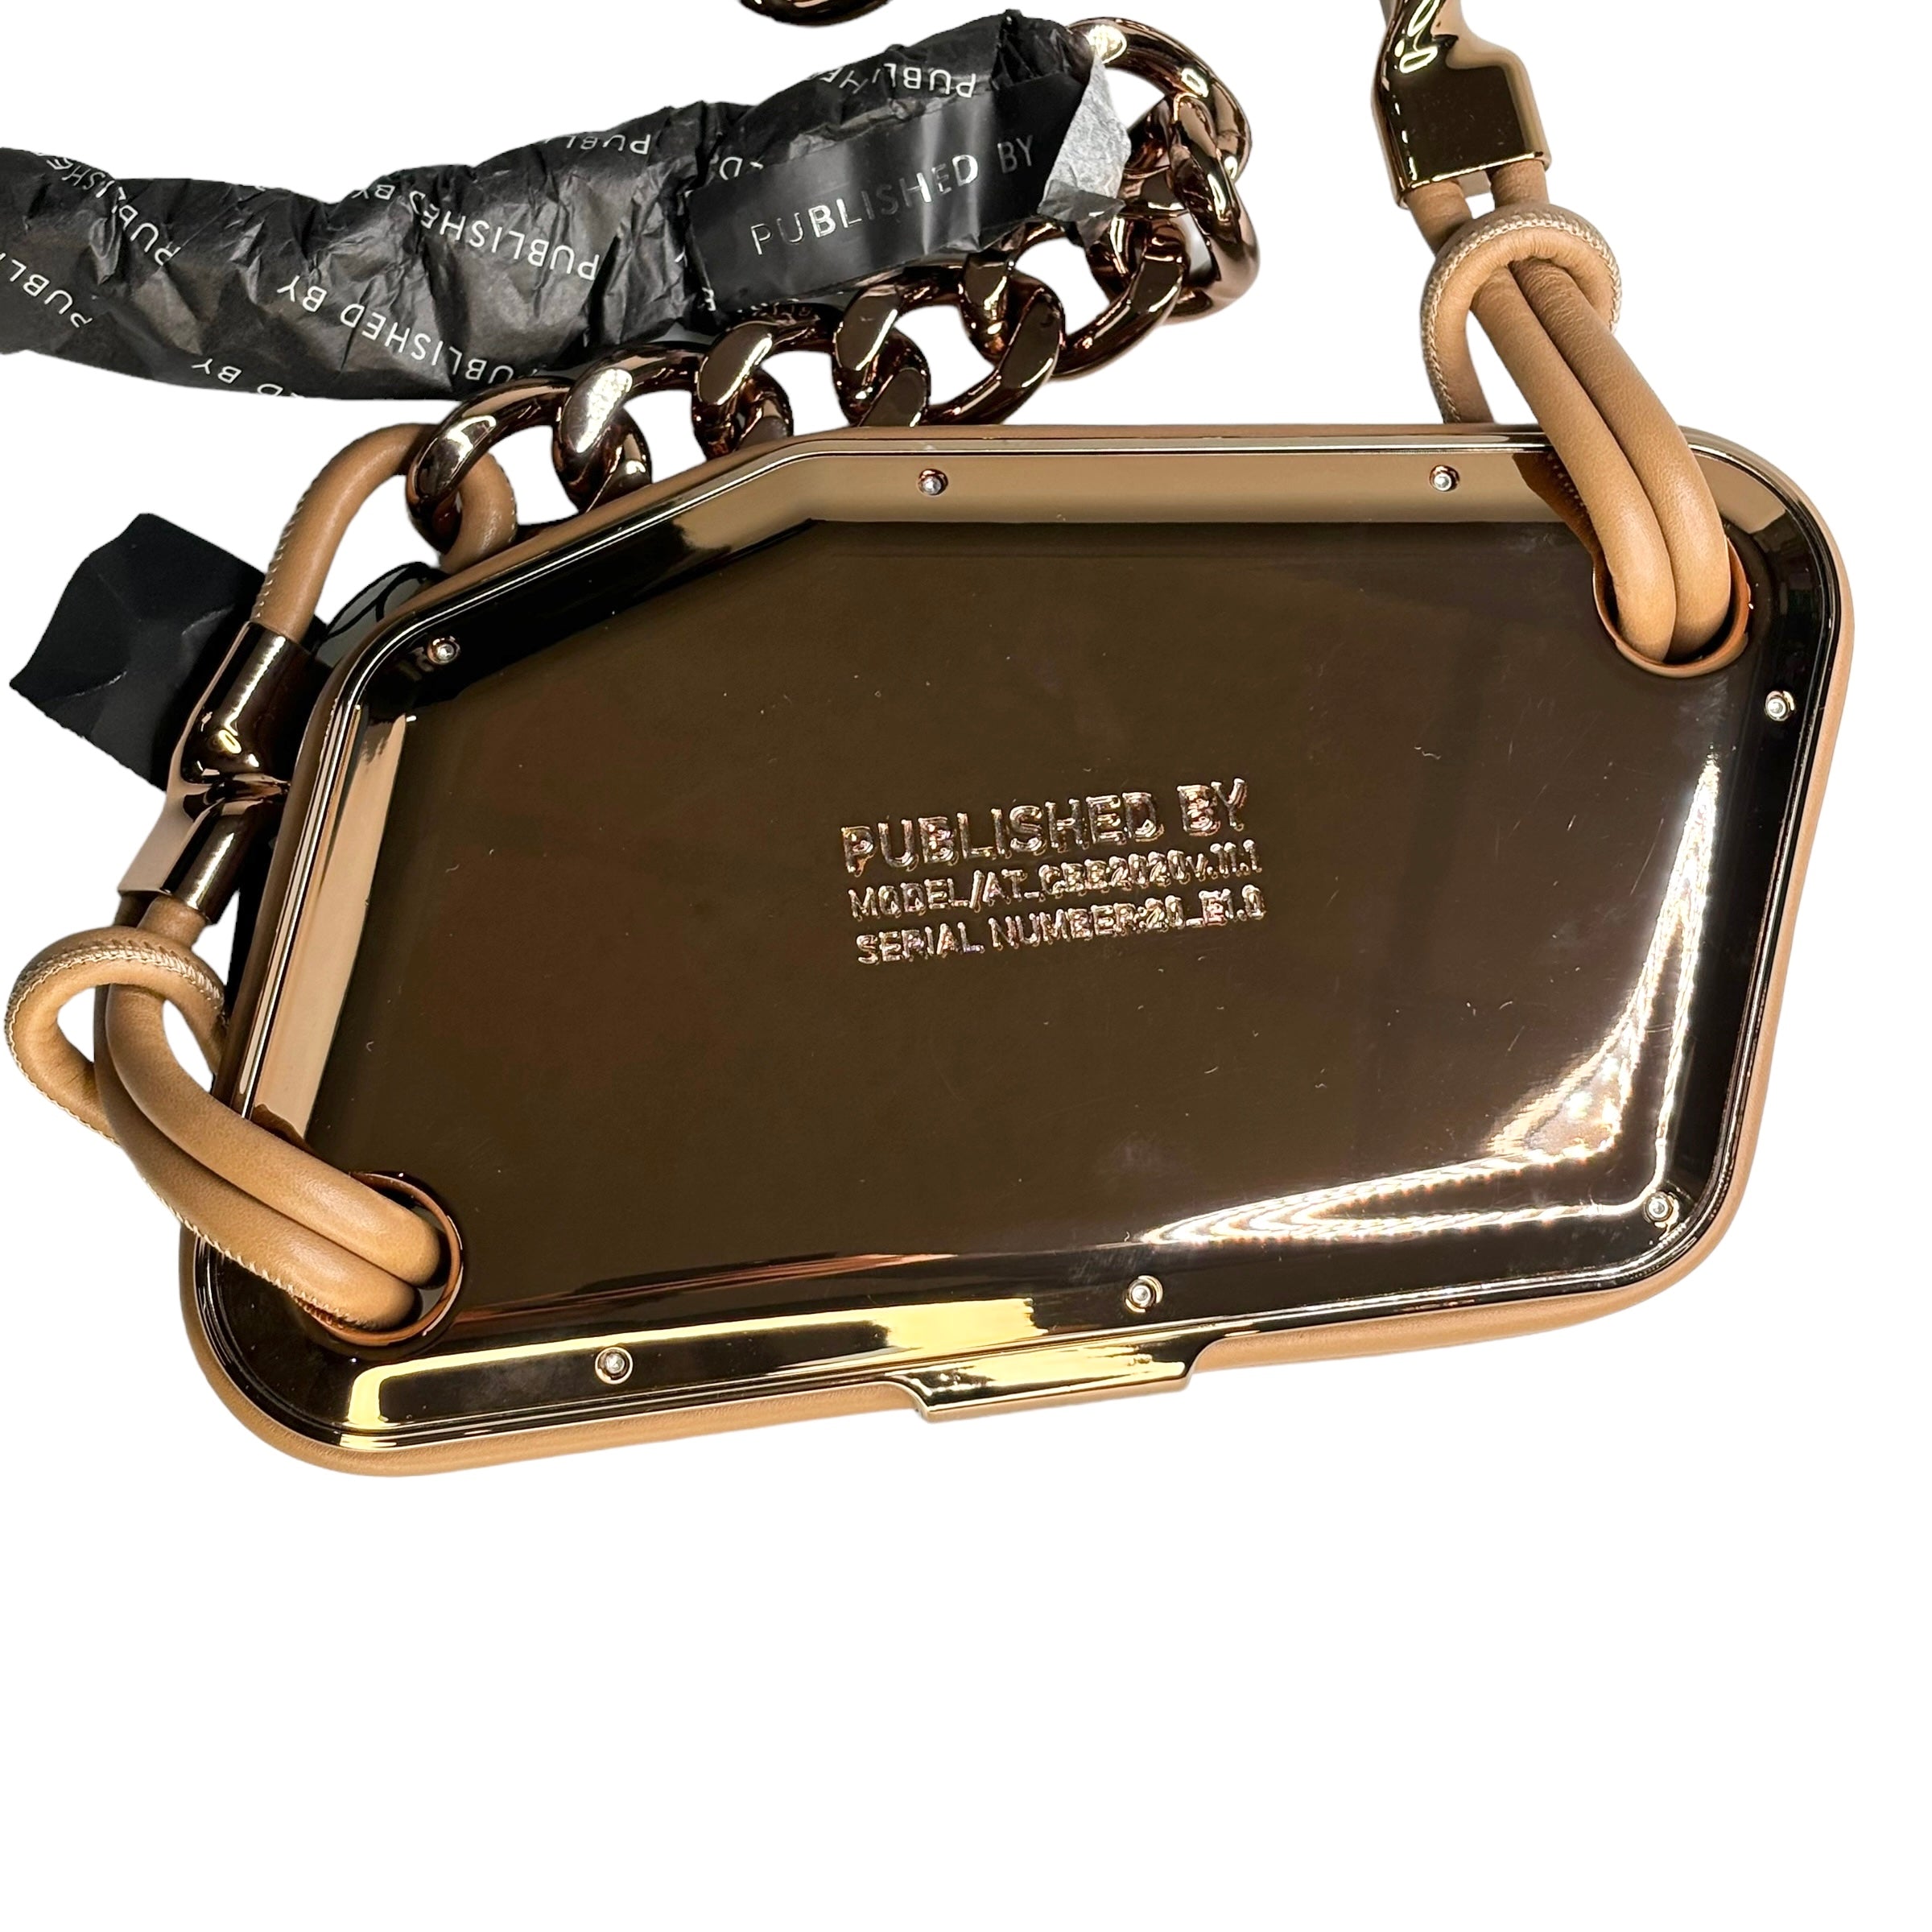 PUBLISHED BY Cross Body Bag With Chain Strap